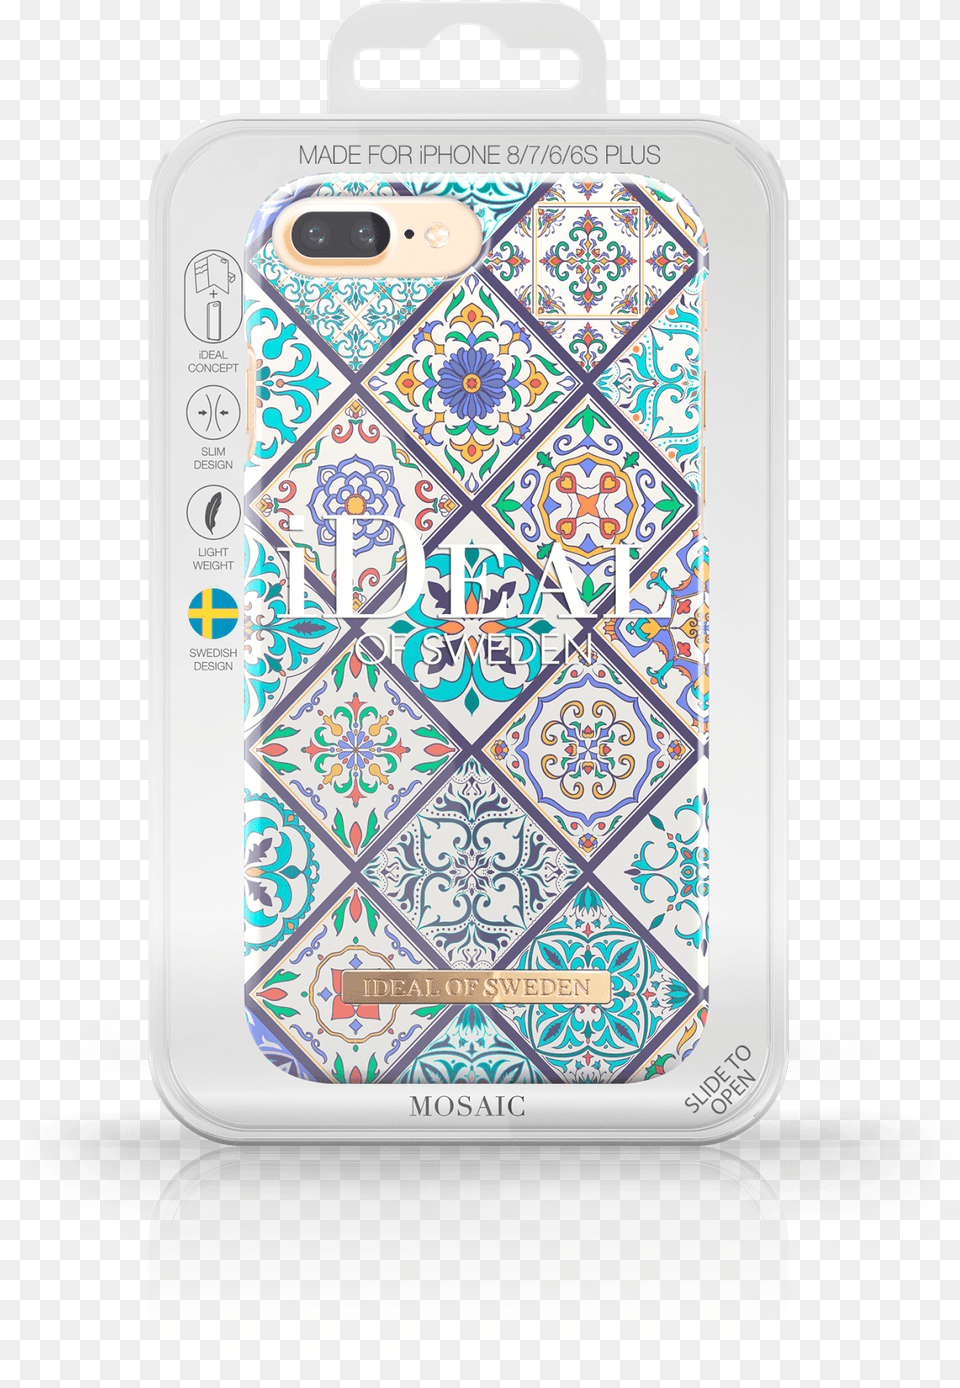 Brightstar Iphone 8 Plus Case Mosaic, Electronics, Mobile Phone, Phone Png Image